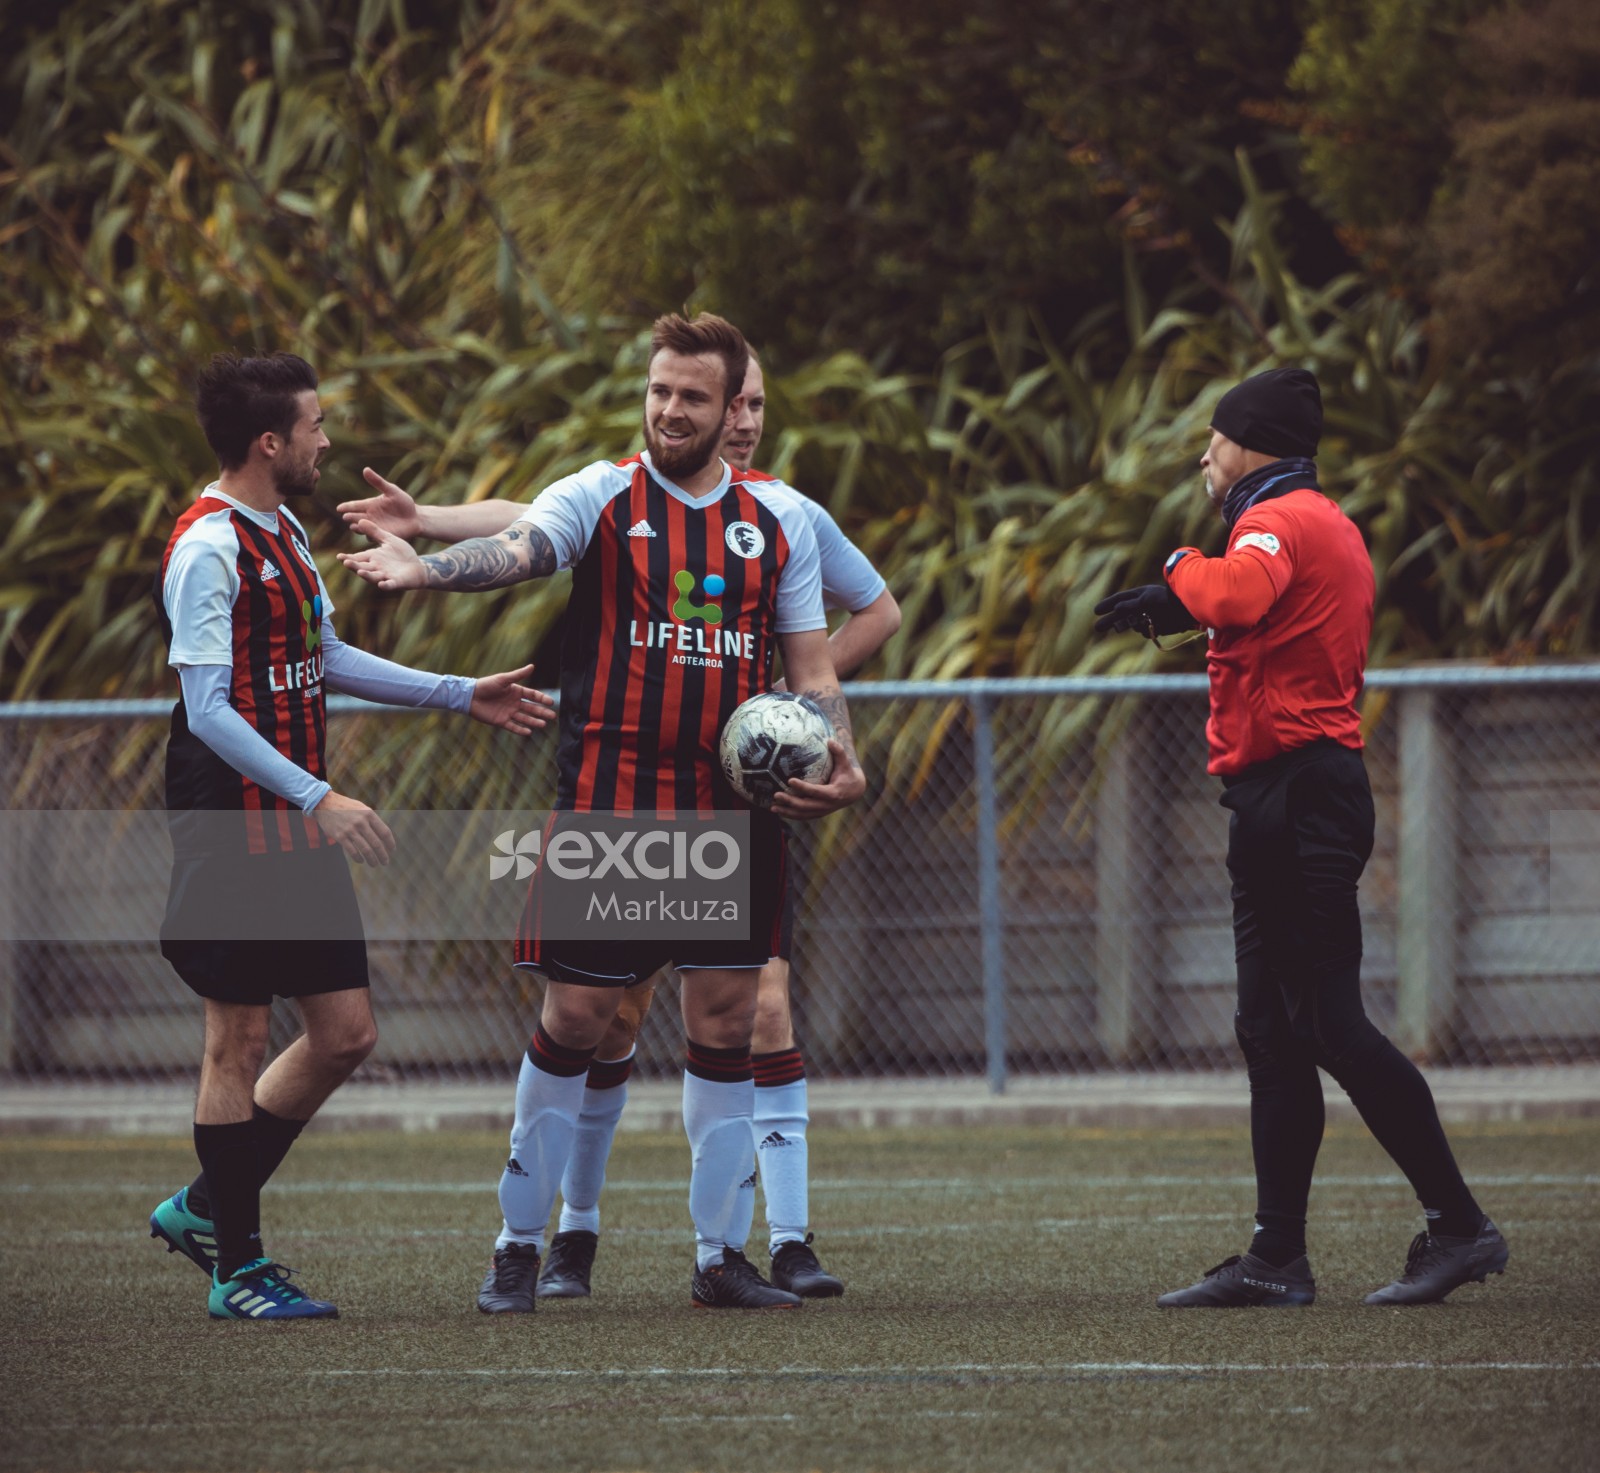 Player holding football talking to referee - Sports Zone sunday league